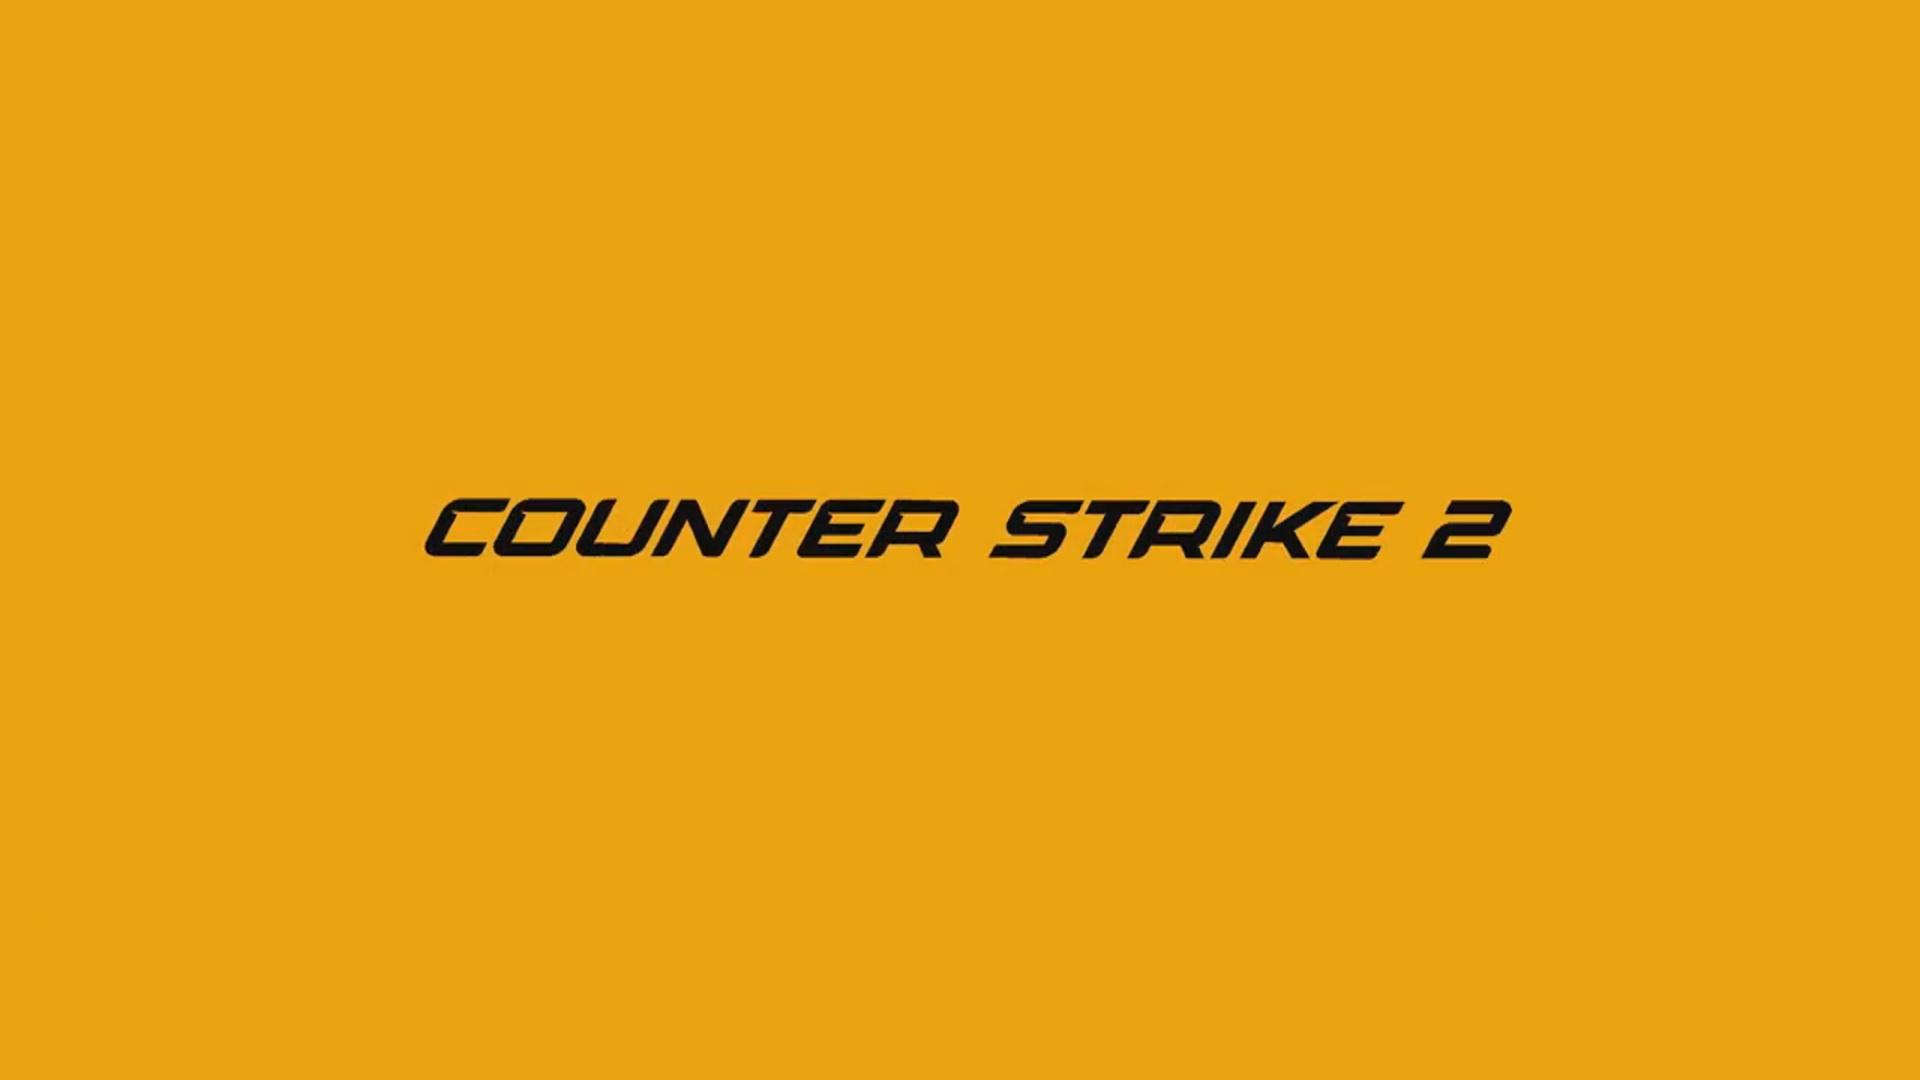 Is Counter-Strike 2 going to be free to play?